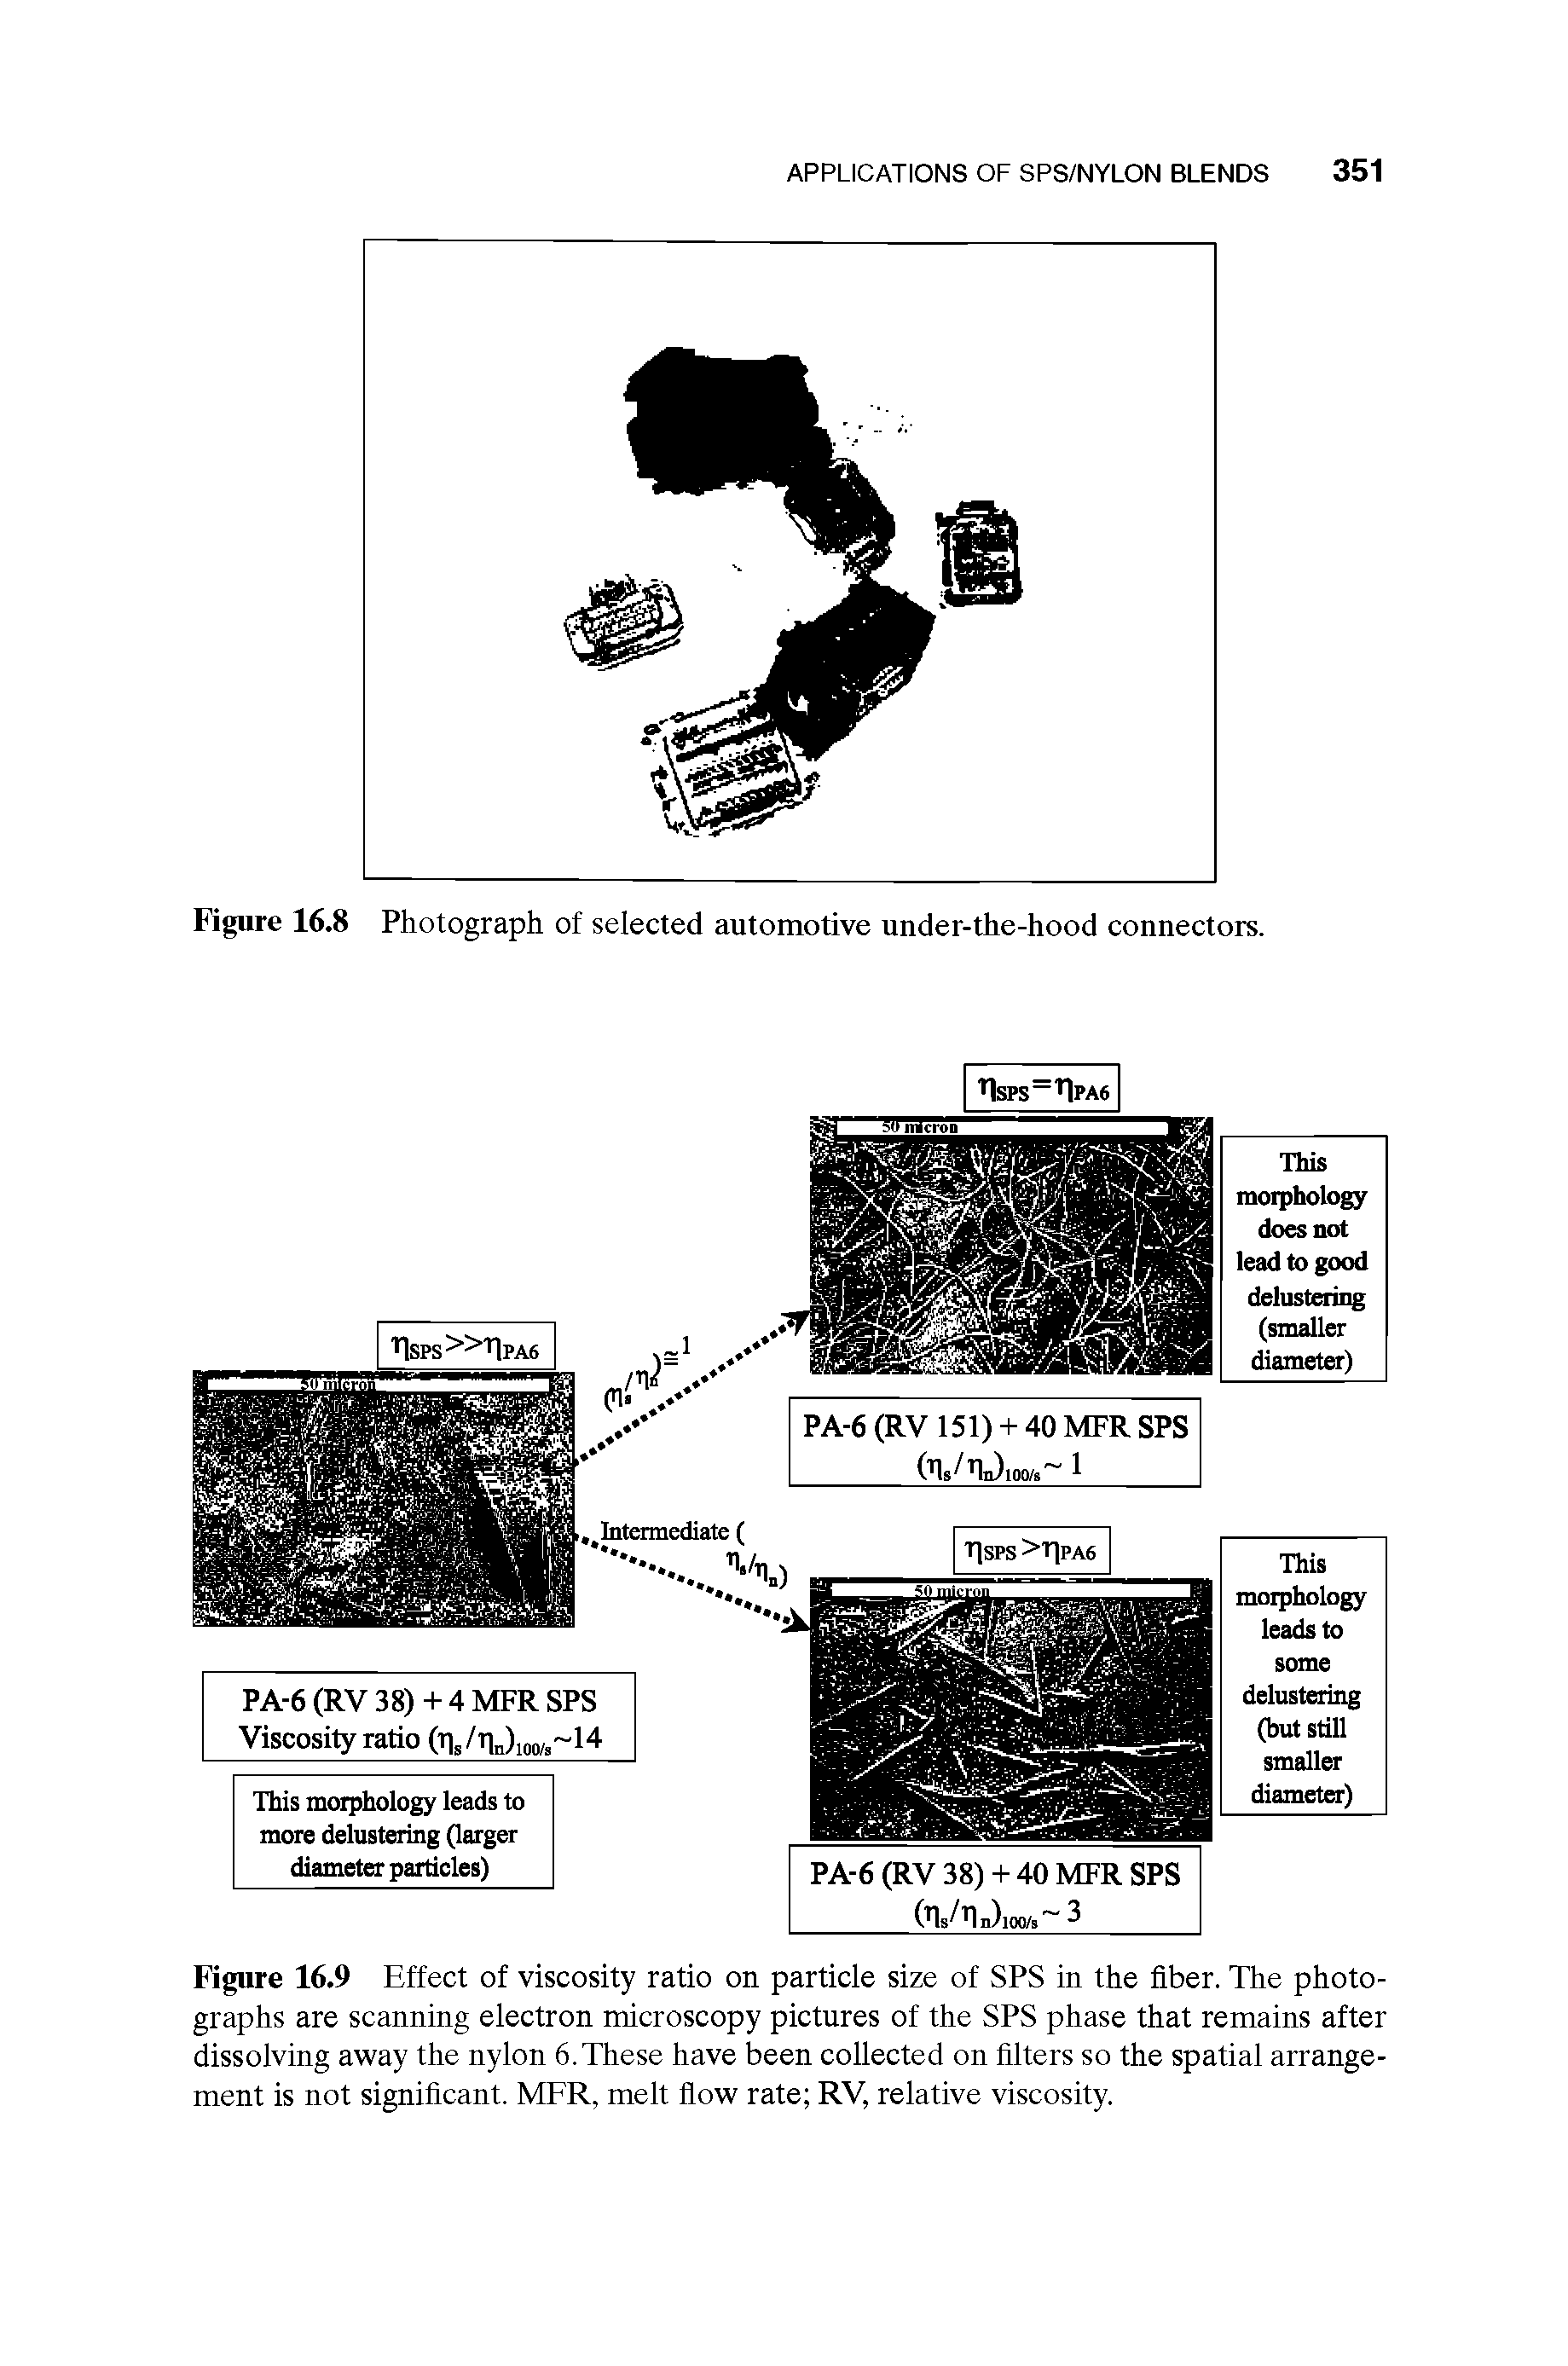 Figure 16.9 Effect of viscosity ratio on particle size of SPS in the fiber. The photographs are scanning electron microscopy pictures of the SPS phase that remains after dissolving away the nylon 6. These have been collected on filters so the spatial arrangement is not significant. MFR, melt flow rate RV, relative viscosity.